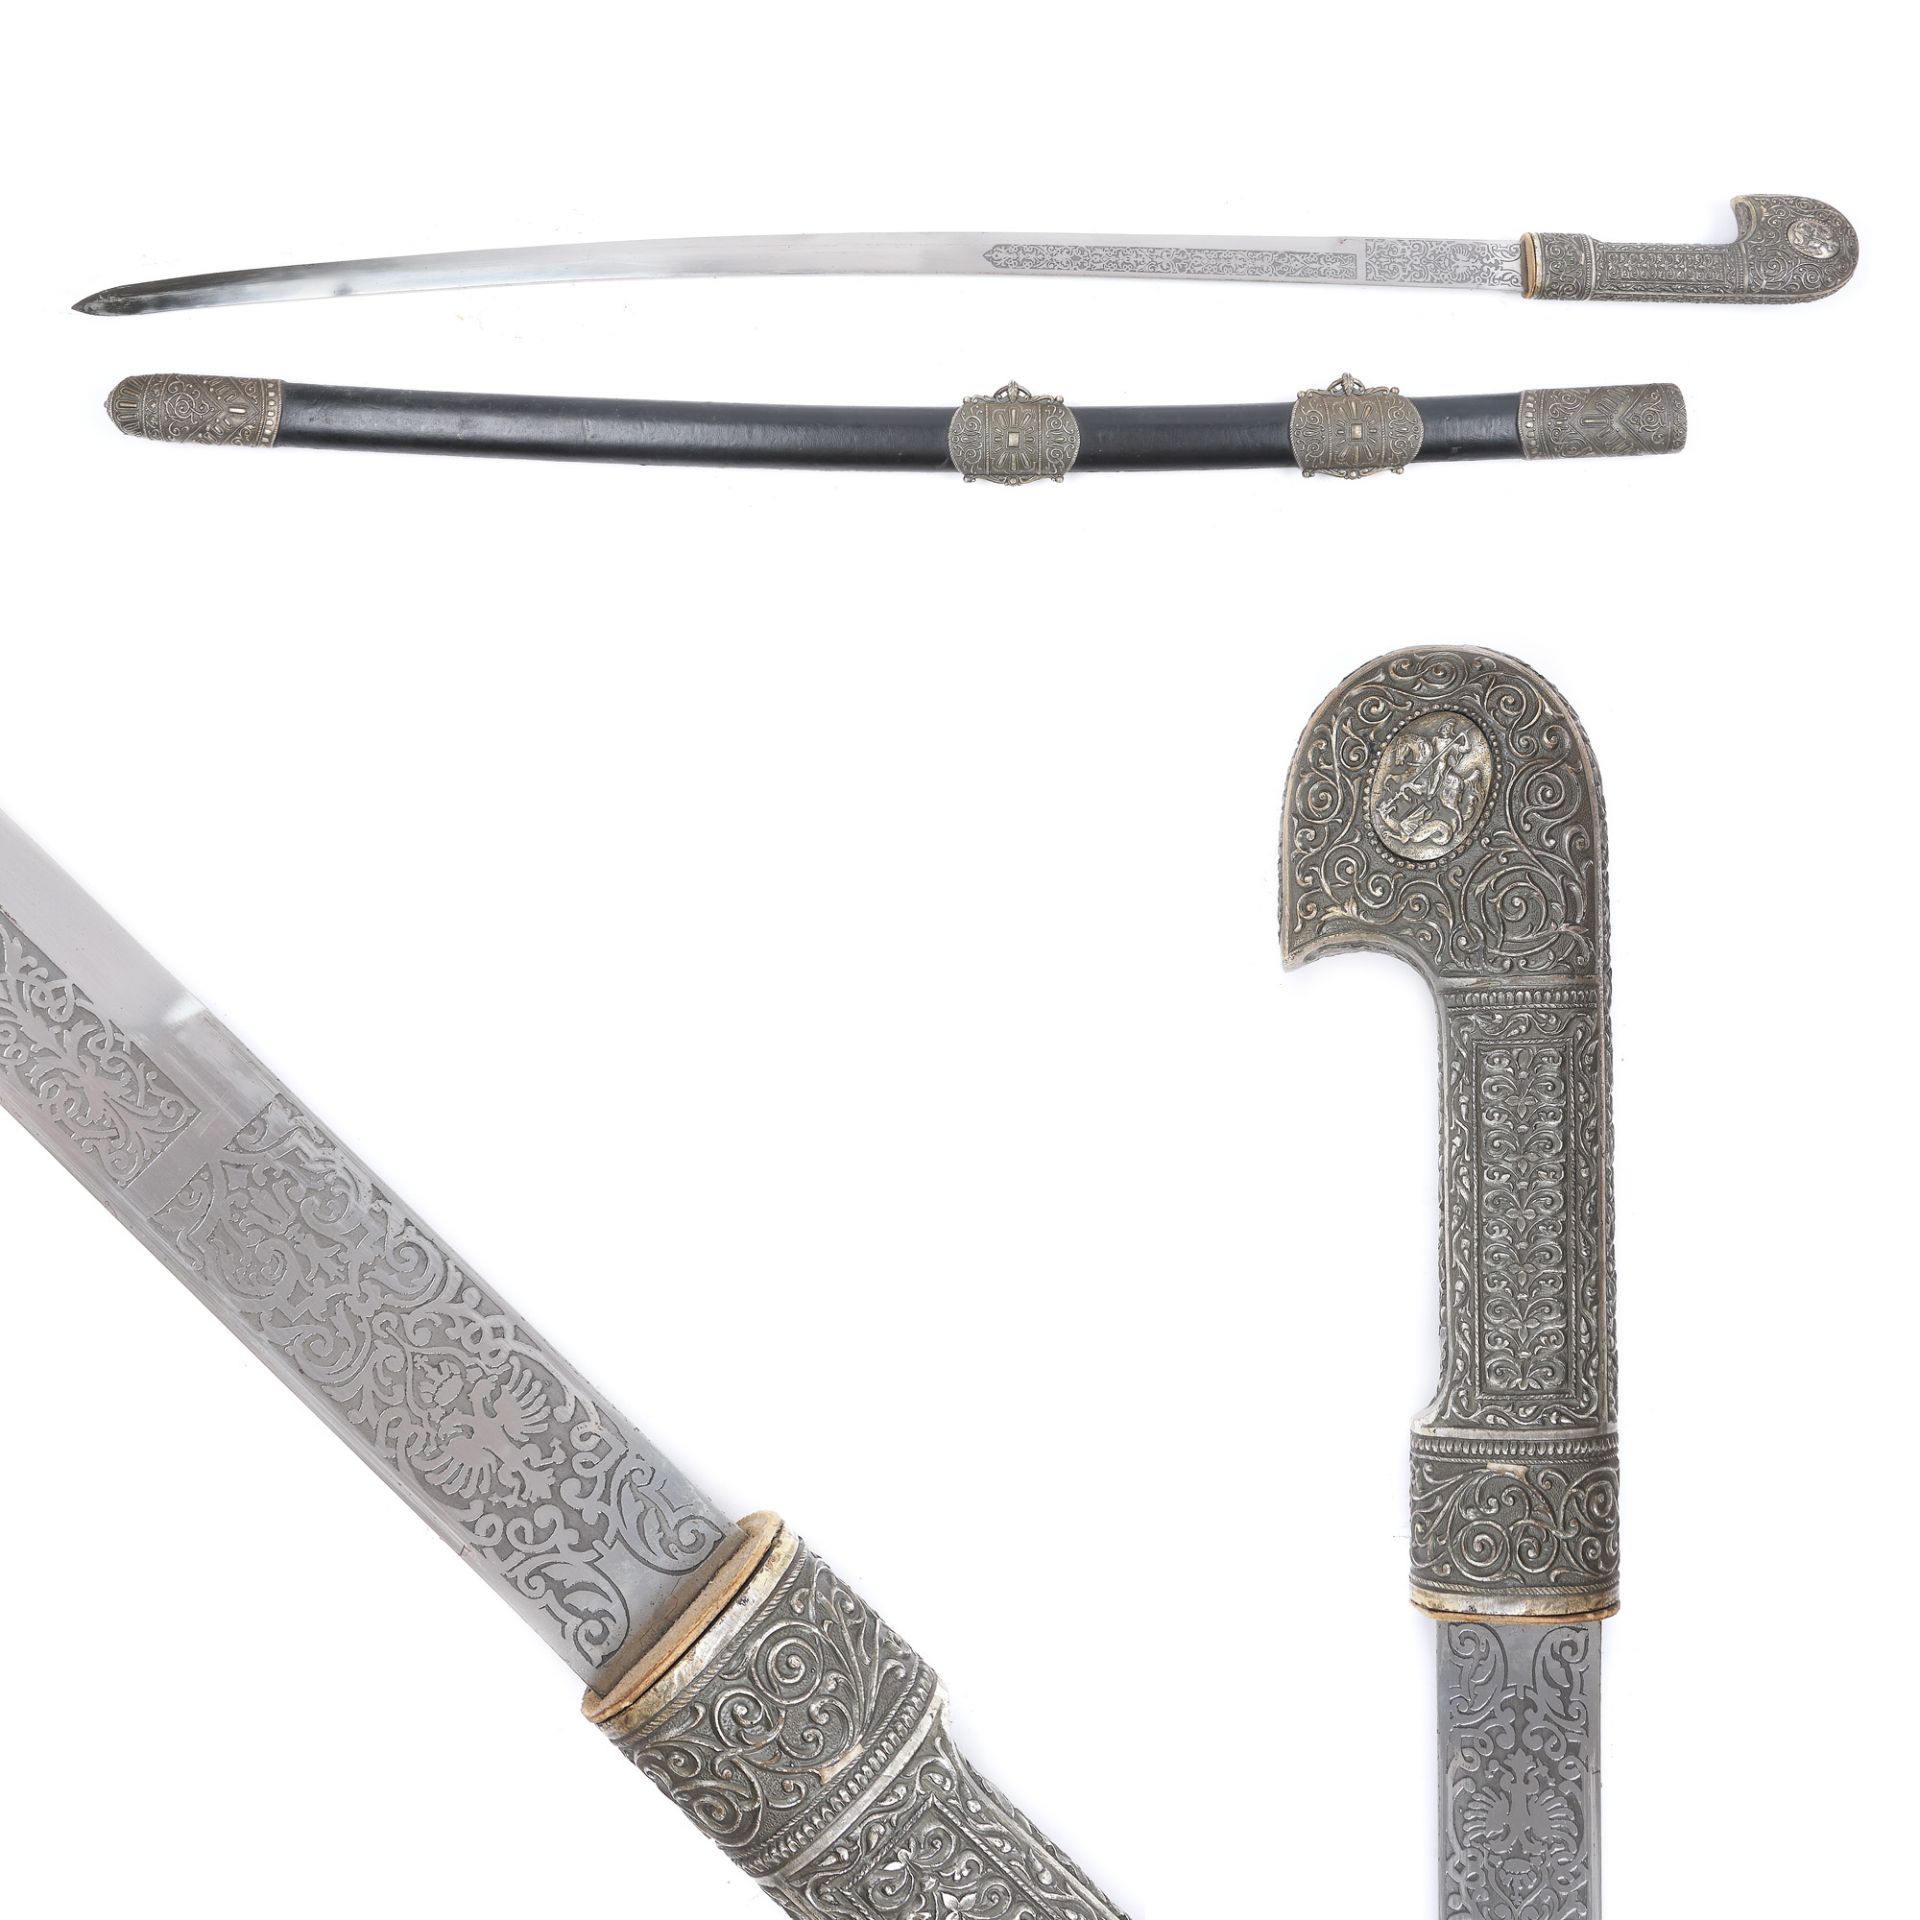 Pair of Tsarist swords, Russia, early 20th century - Image 2 of 8